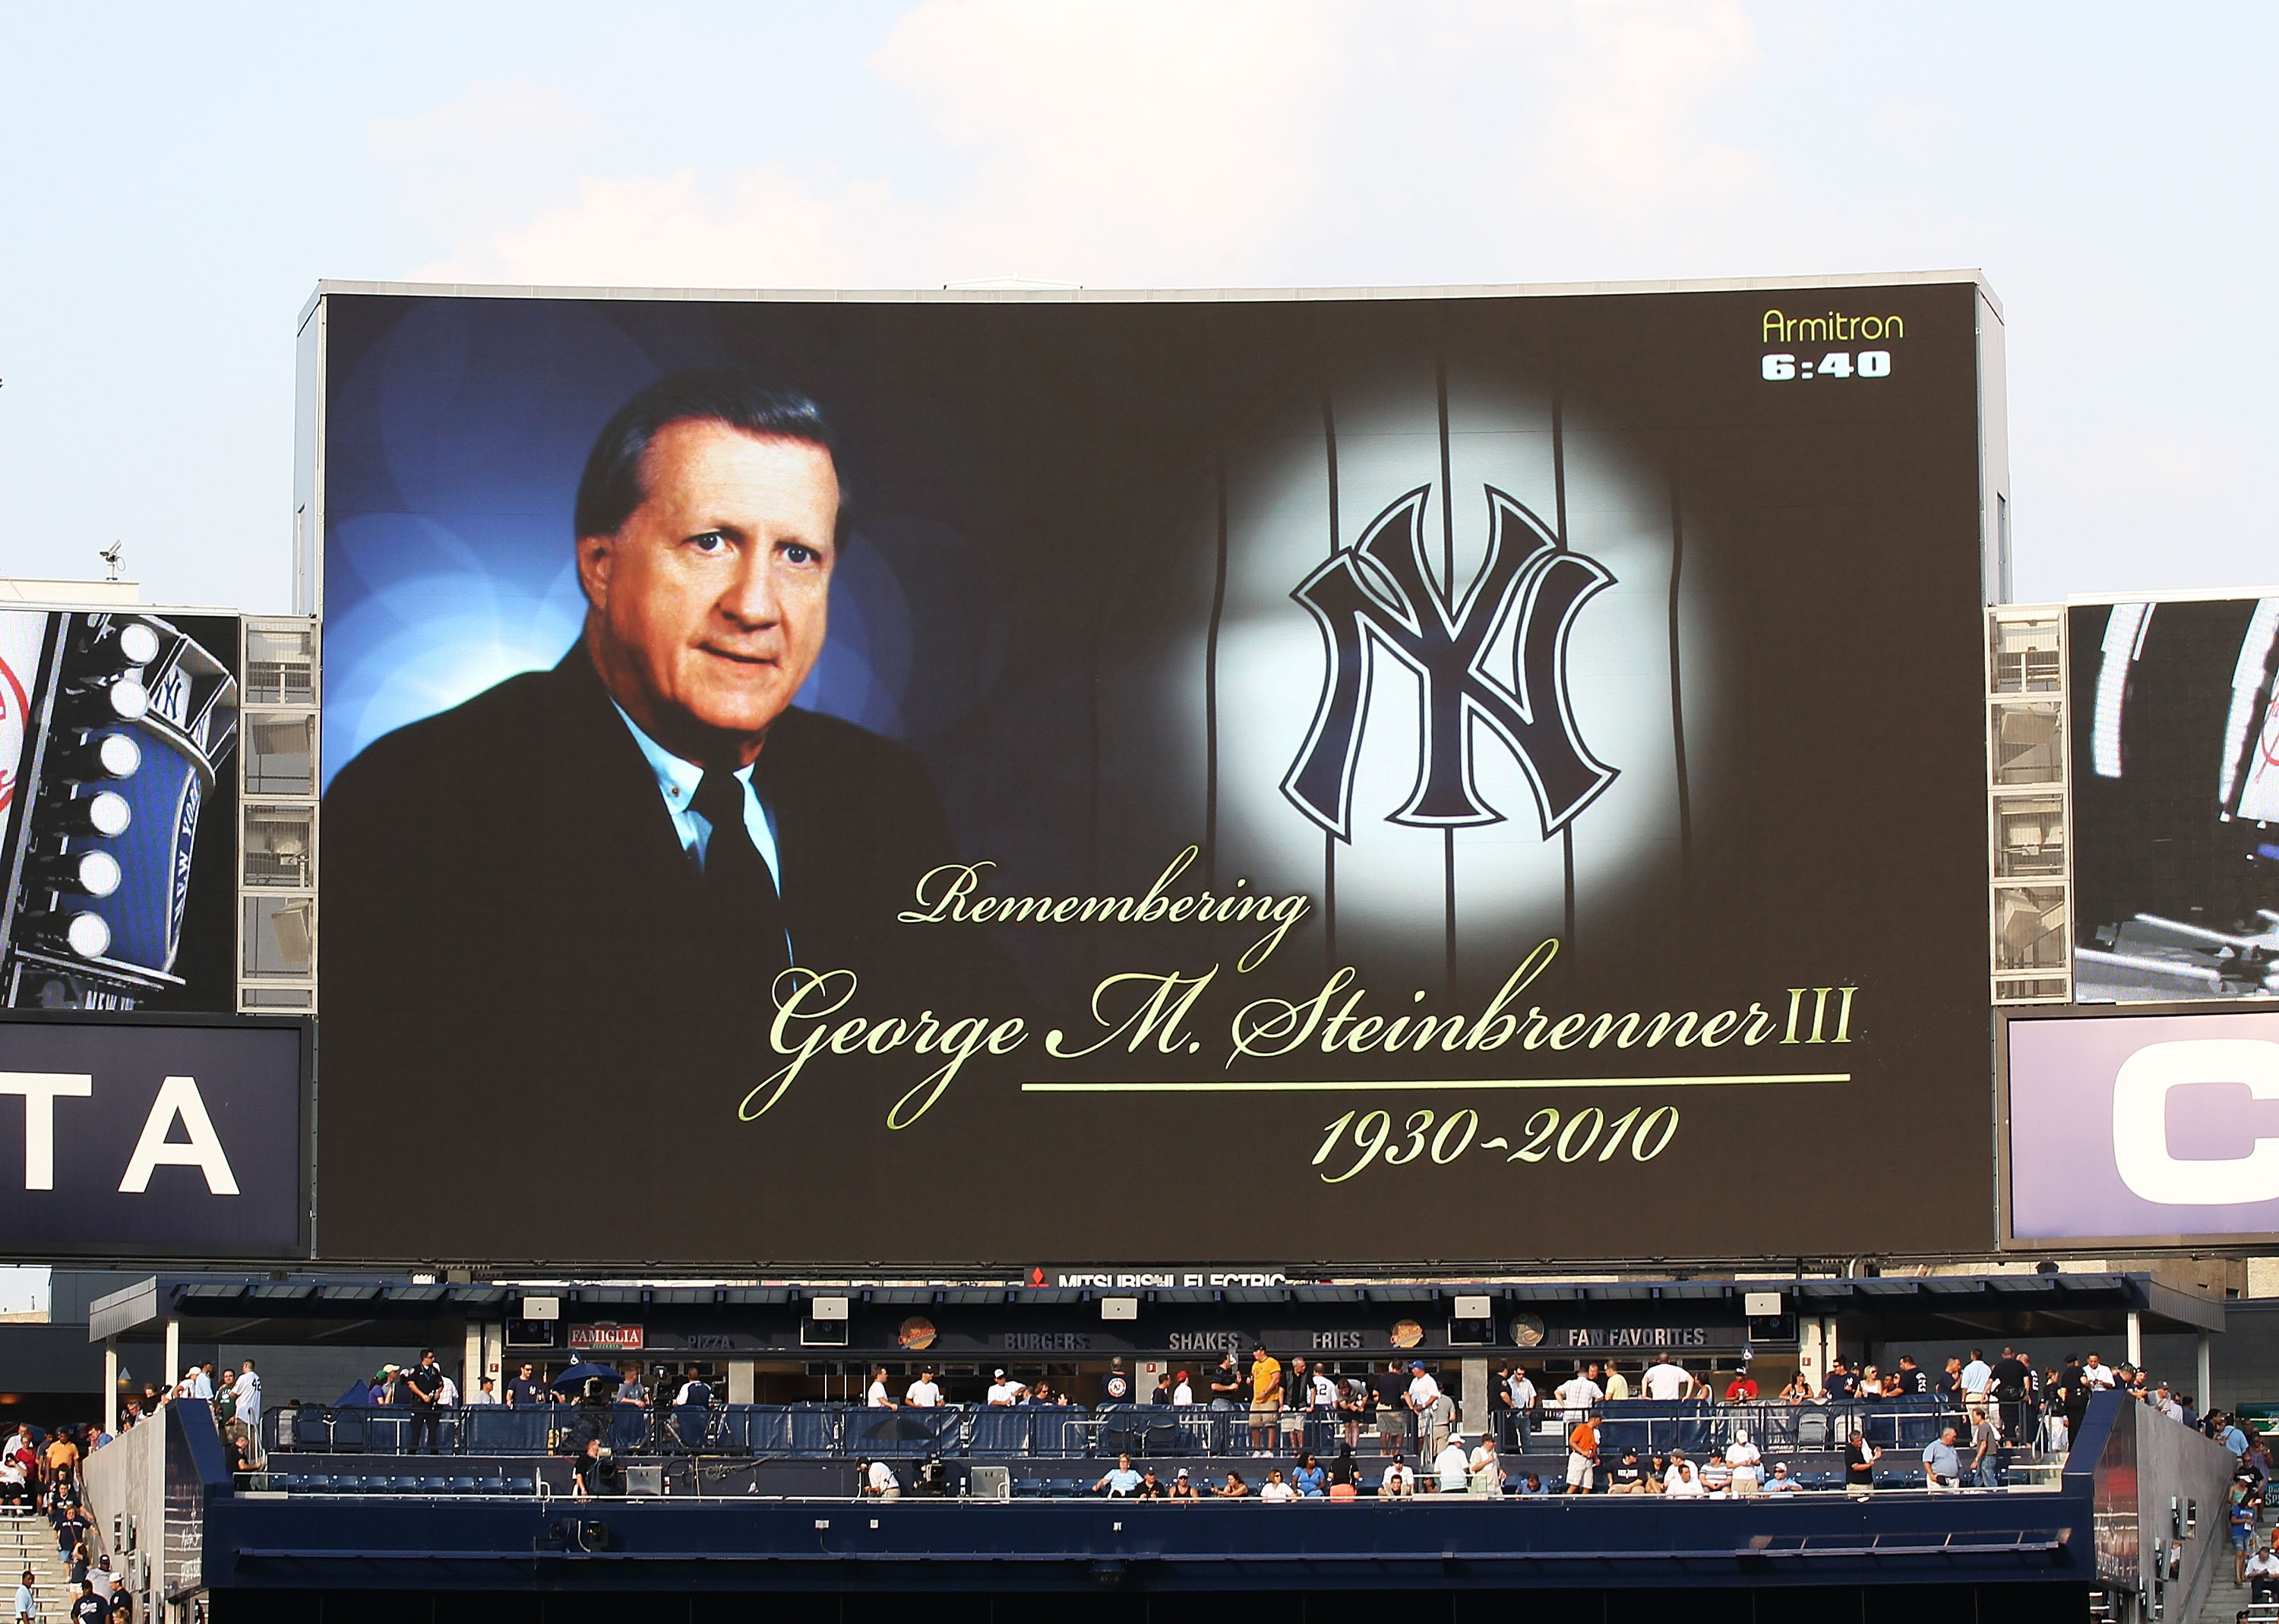 NEW YORK - JULY 16:  The scoreboard displays a photo of George Steinbrenner, Owner of the New York Yankees during his memorial ceremony before the game against theTampa Bay Rays  on July 16, 2010 at Yankee Stadium in the Bronx borough of New York City.  (